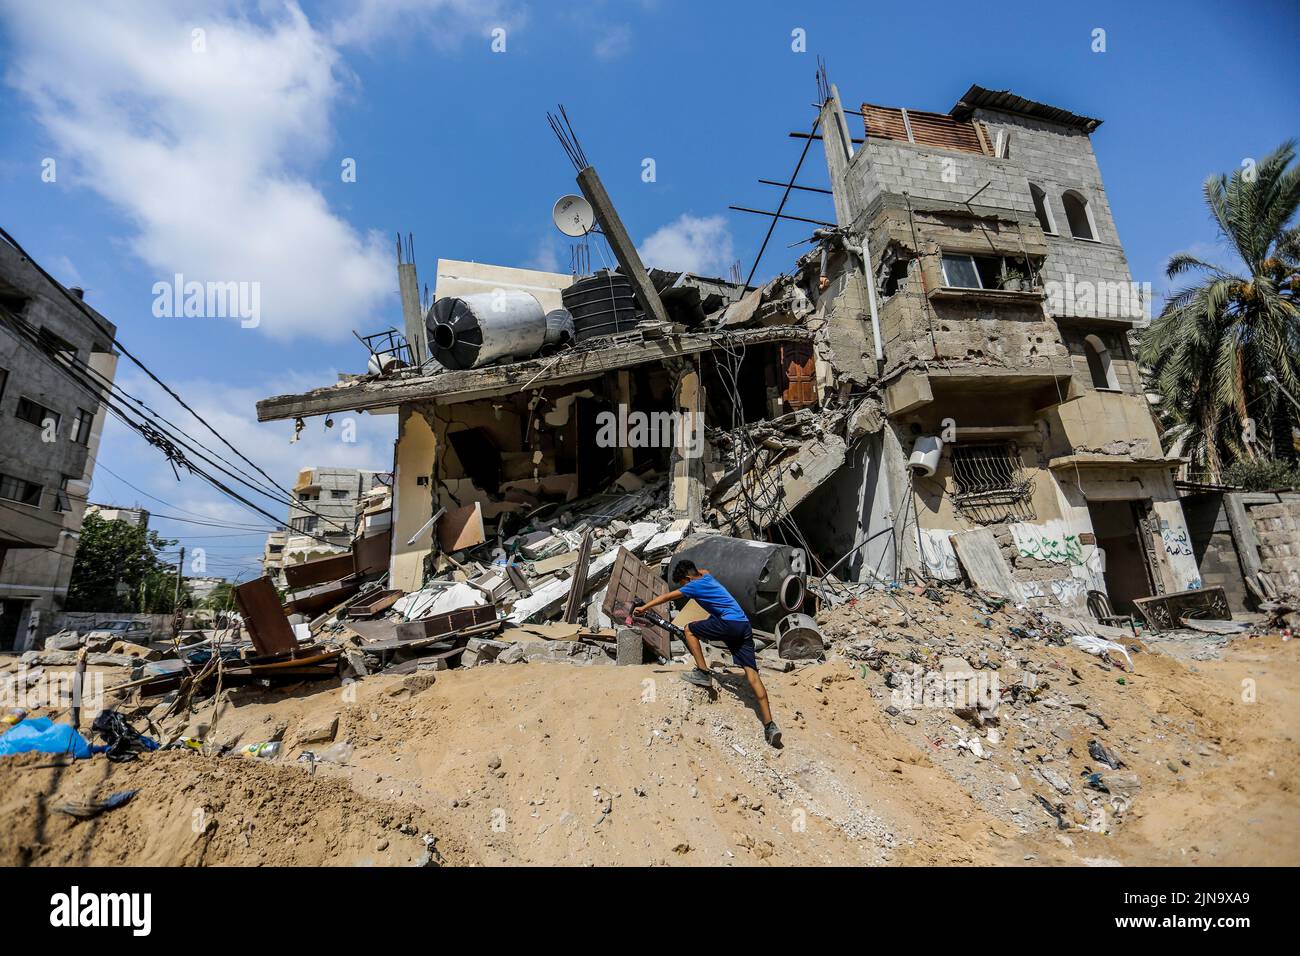 Gaza City, The Gaza Strip. August 10, 2022, Gaza City, The Gaza Strip, Palestine: A Palestinian inspects the rubble of his destroyed house after Israeli attacks on Gaza, 10 August 2022. On 07 August at 23:30 local time (20:30 GMT), Israel and Palestinian militants in Gaza confirmed an Egyptian-mediated ceasefire which came into effect after three days of exchanging rocket attacks and airstrikes resulting in the death of at least 44 Palestinians and injury of 360 others, according to the Palestinian Ministry of Health. Credit: ZUMA Press, Inc./Alamy Live News Stock Photo